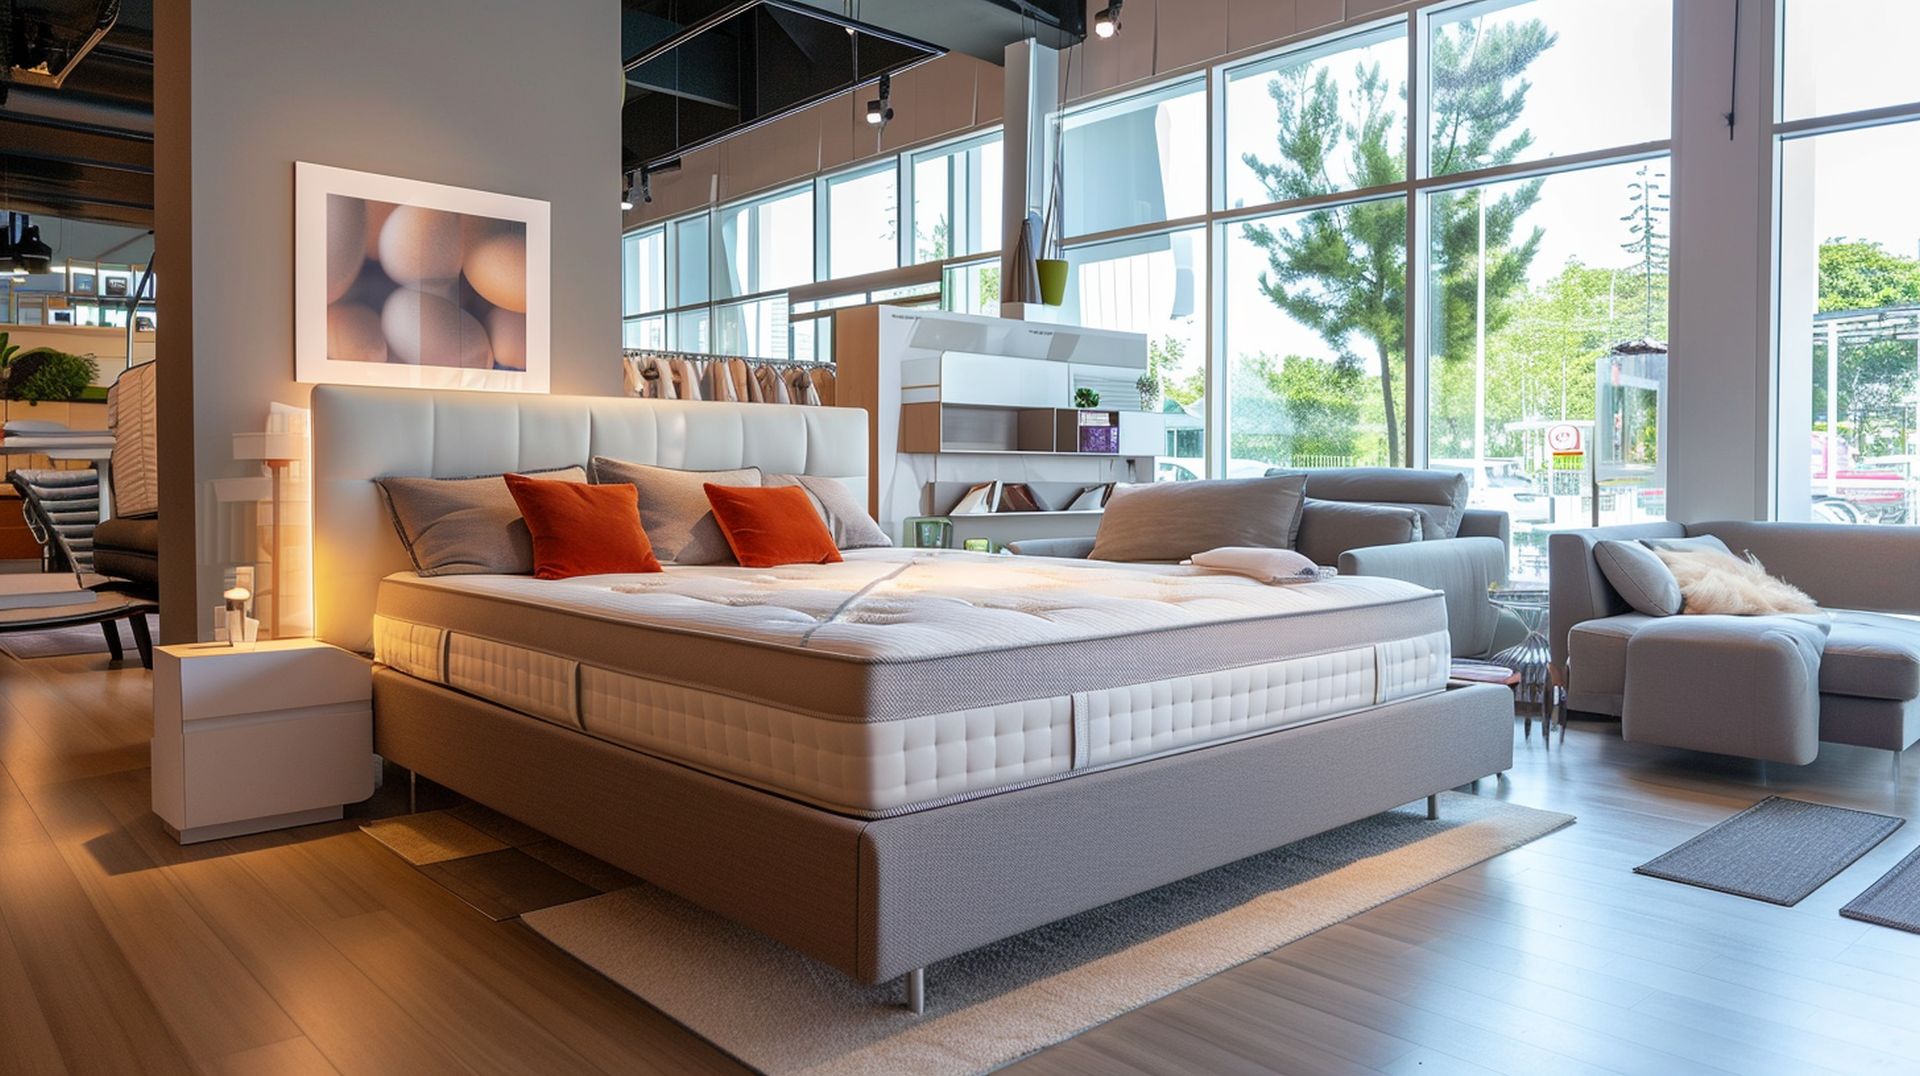 Types of mattresses at mattress dealers in Urbandale, IA